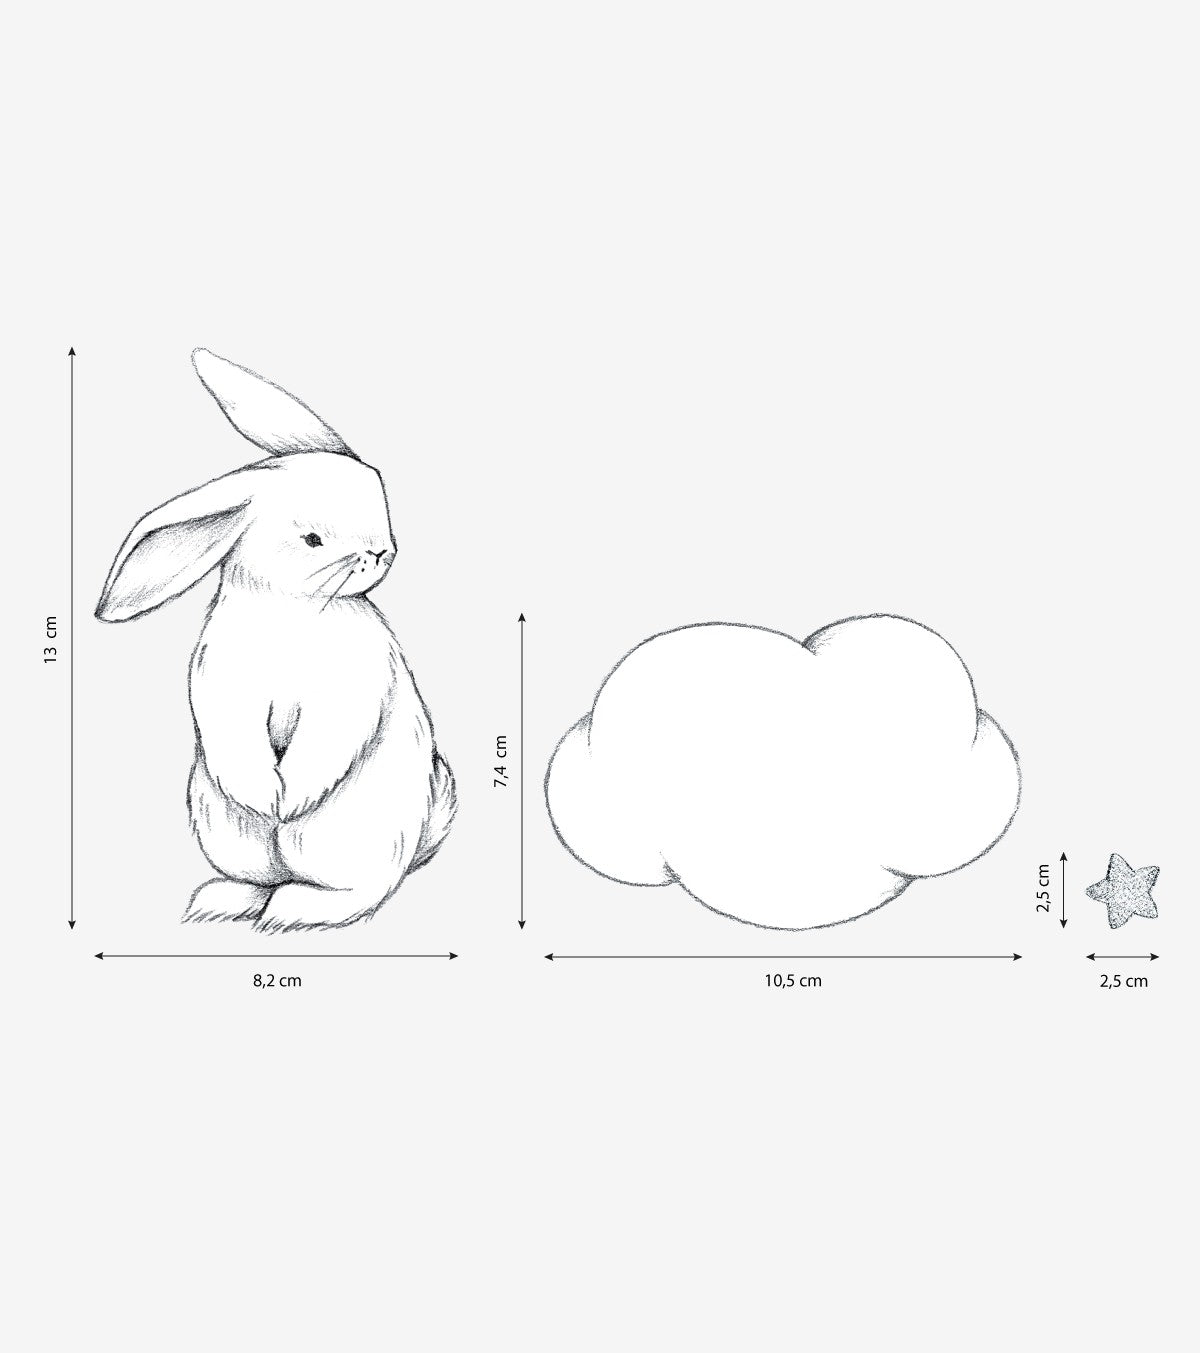 BUNNY - Wall decals murals - Bunnies, clouds and stars